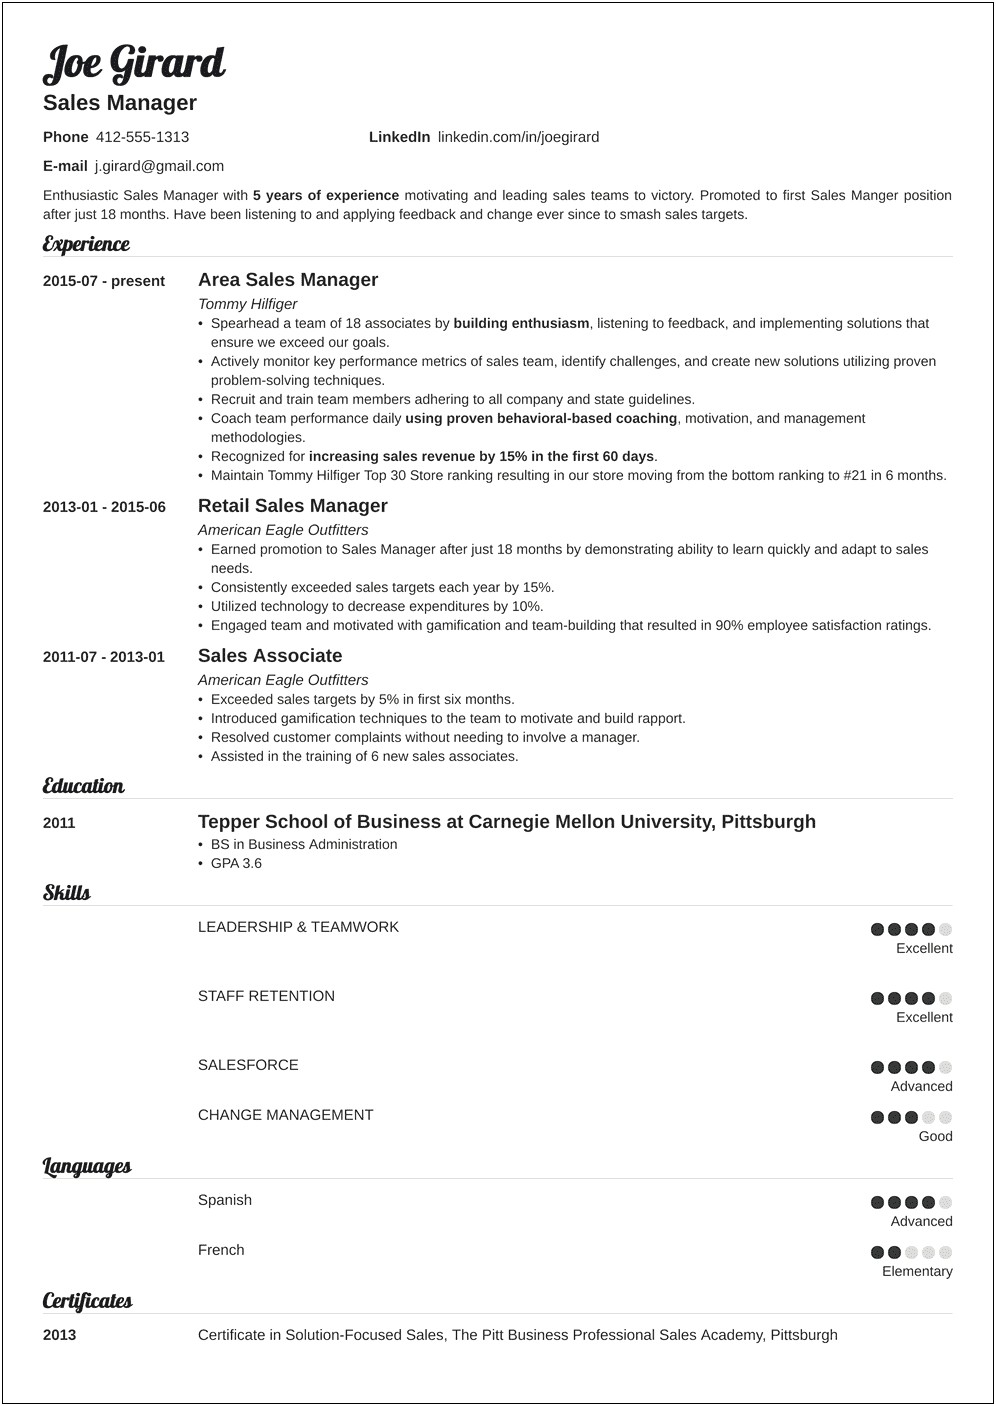 Educational Academy Sales Manager Resume